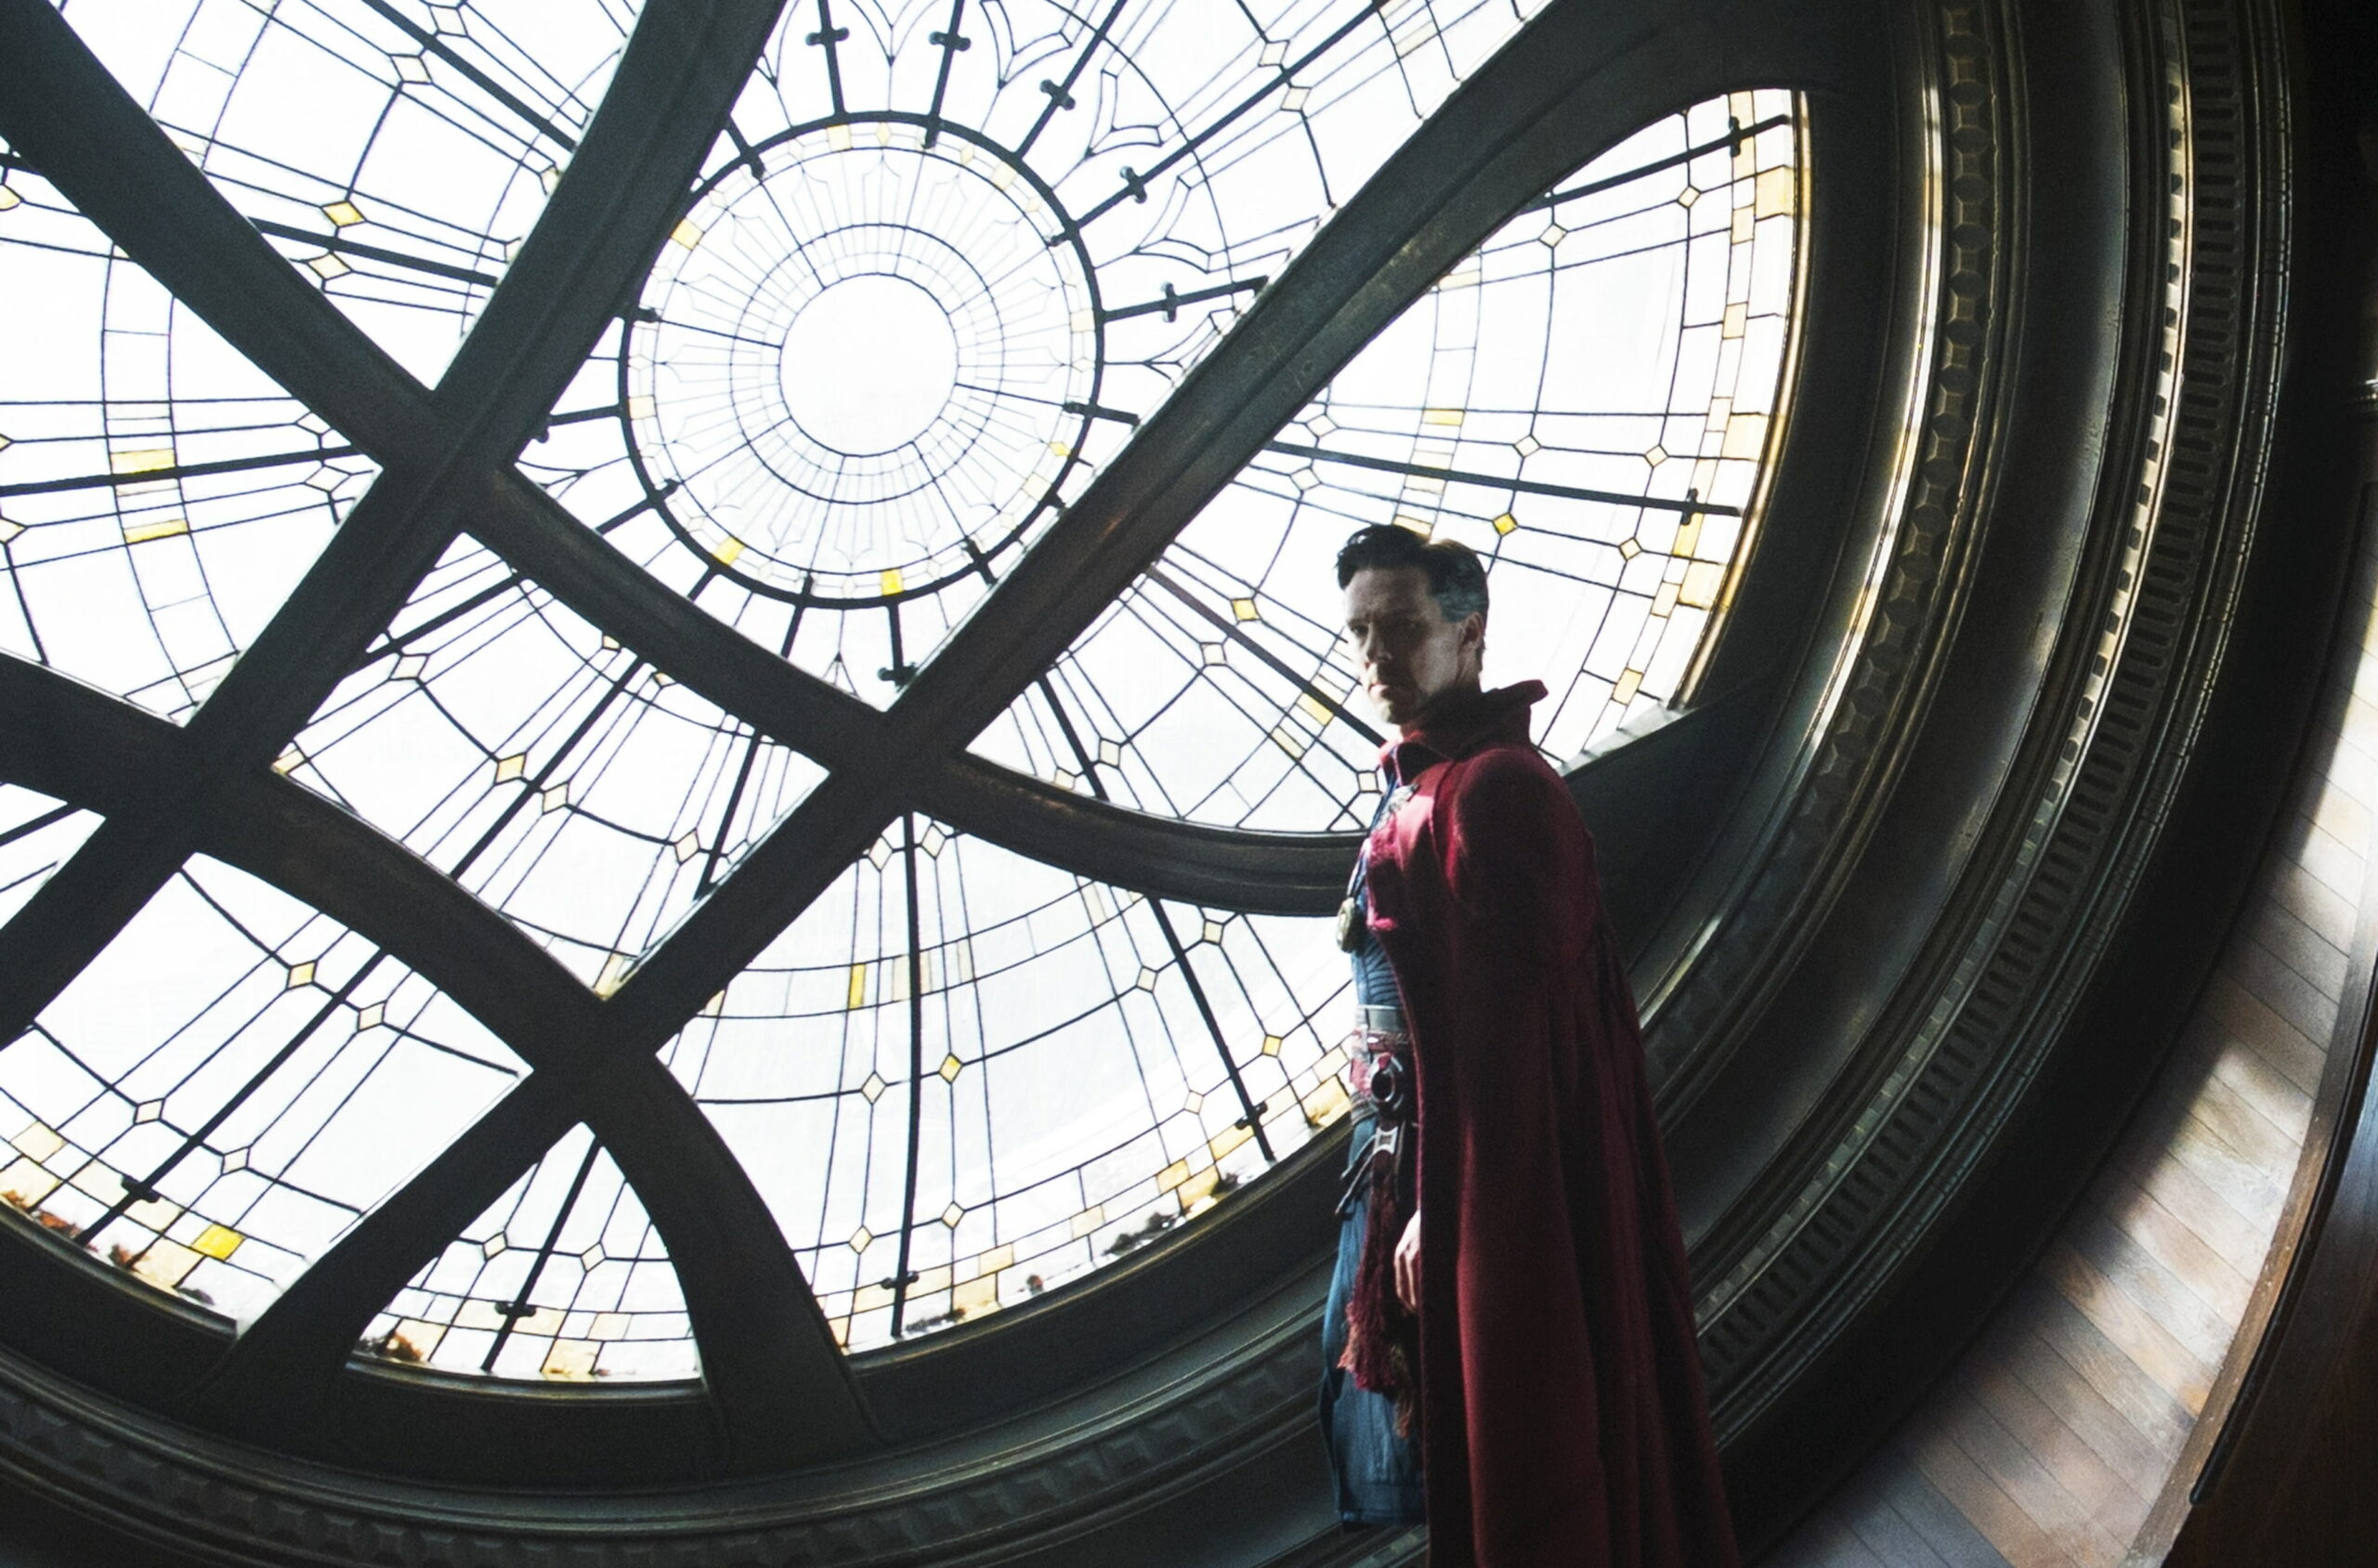 doctor strange 4k new image wallpaper ae27dfe34a6257ffb29a0461630179b2 scaled